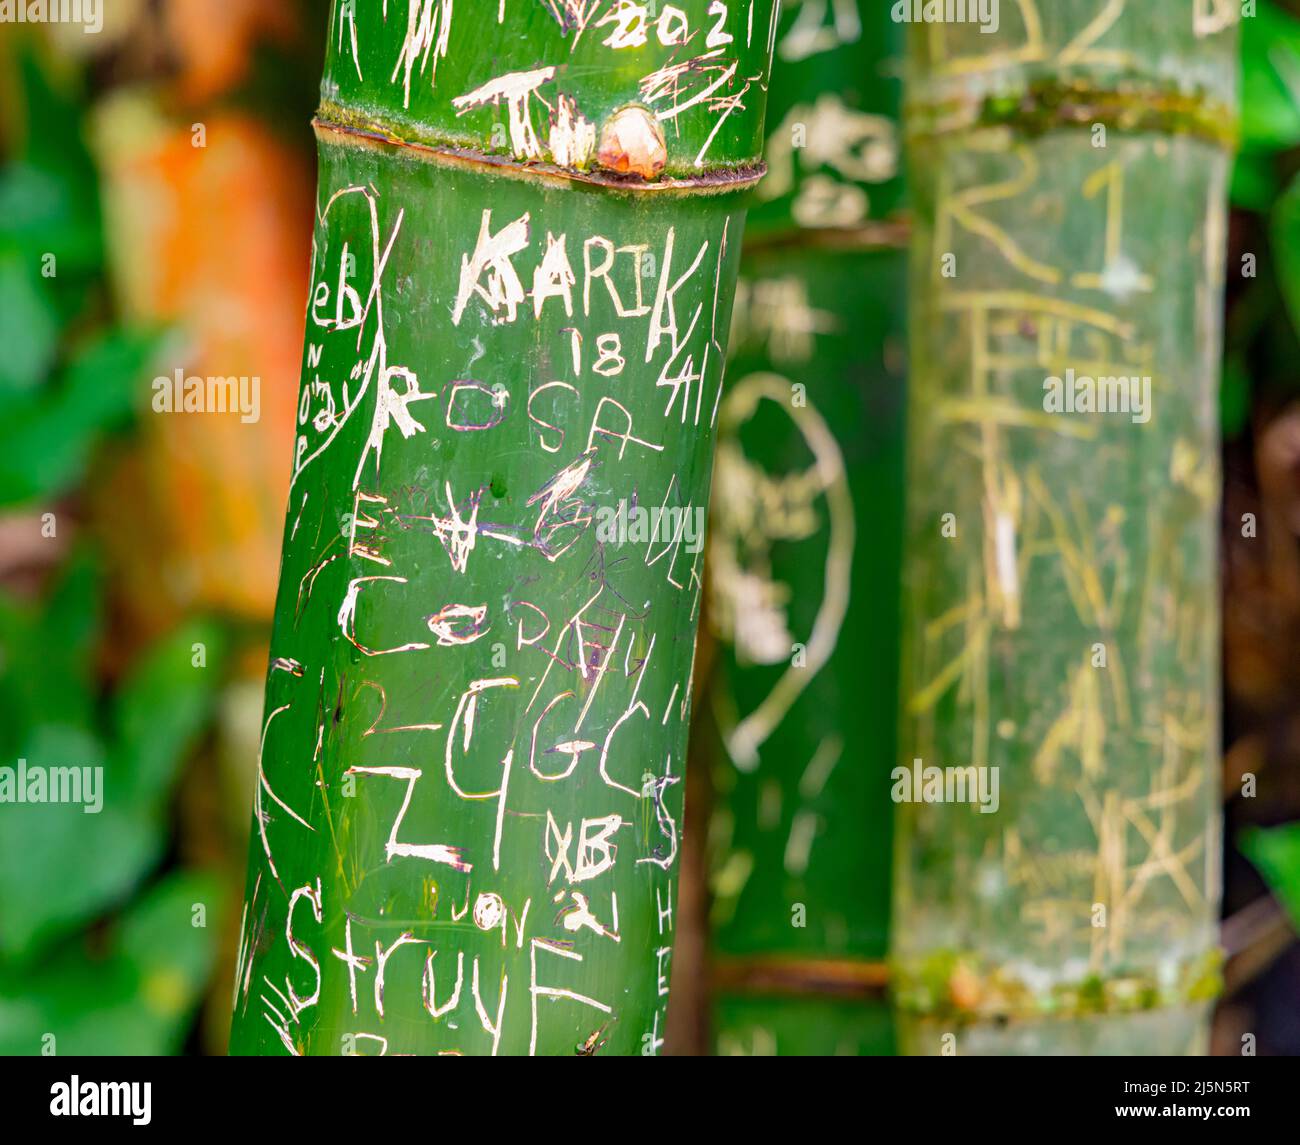 Detail image of names and intials carved into bamboo in El Yunque forest Stock Photo